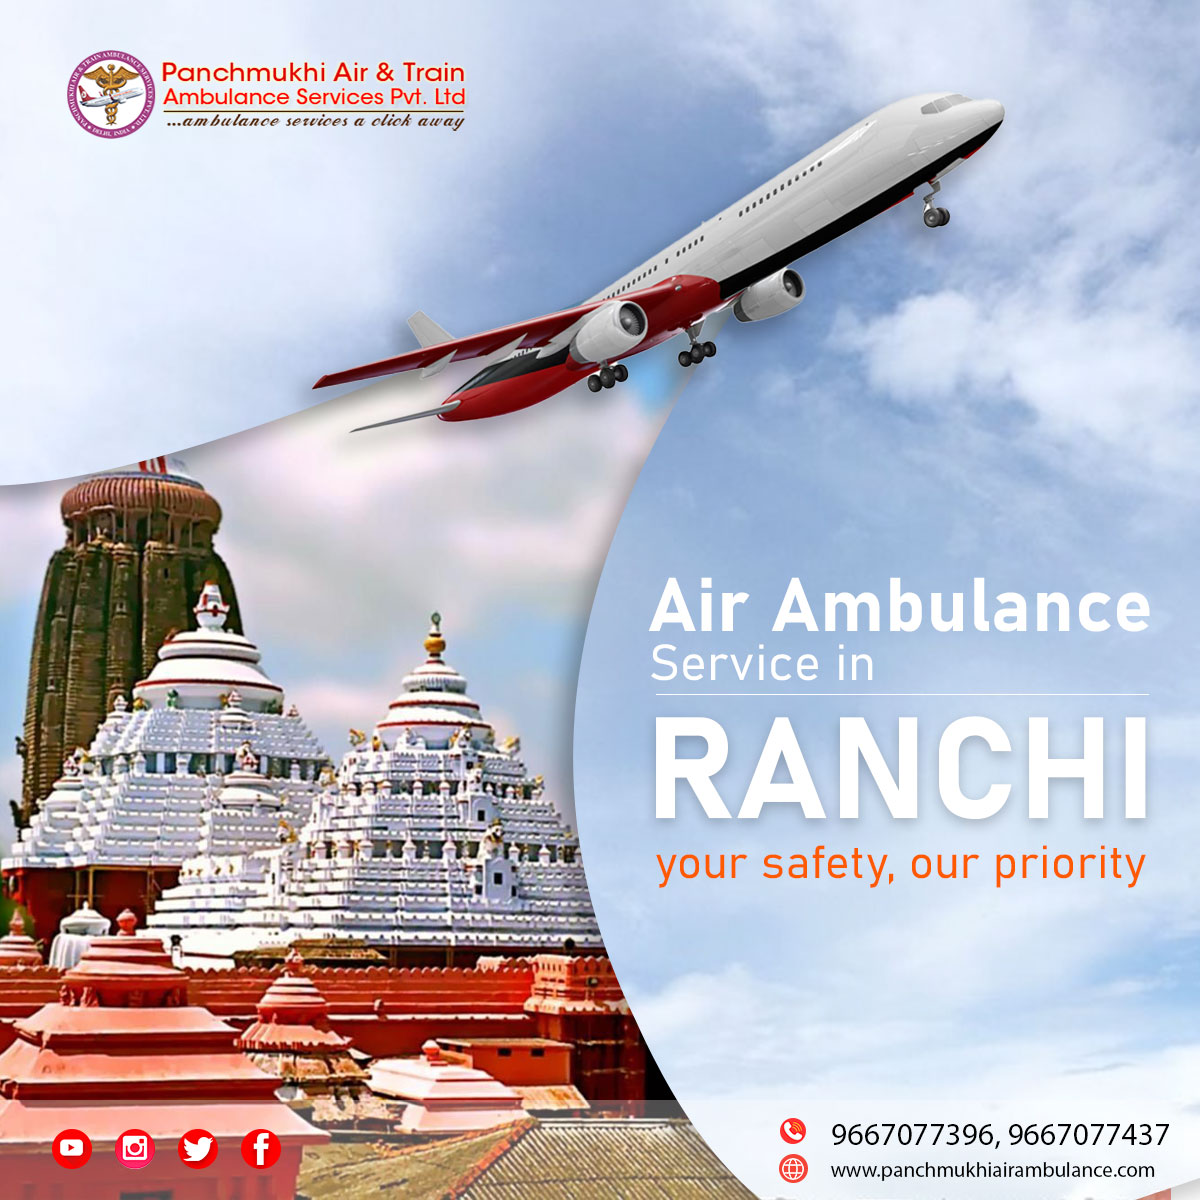 New Charter Air Ambulance Services in Ranchi